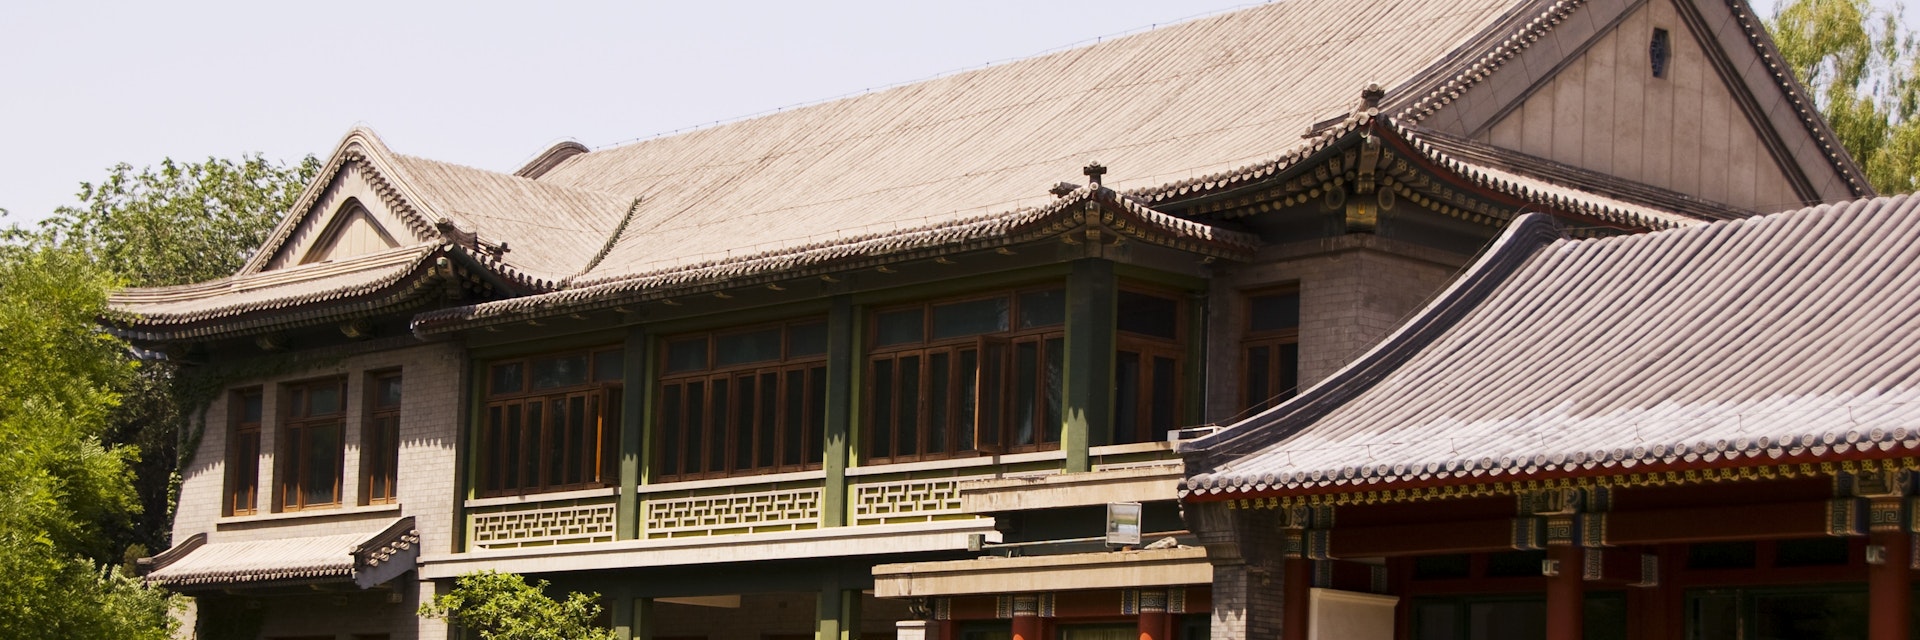 Song Qingling Former Residence.